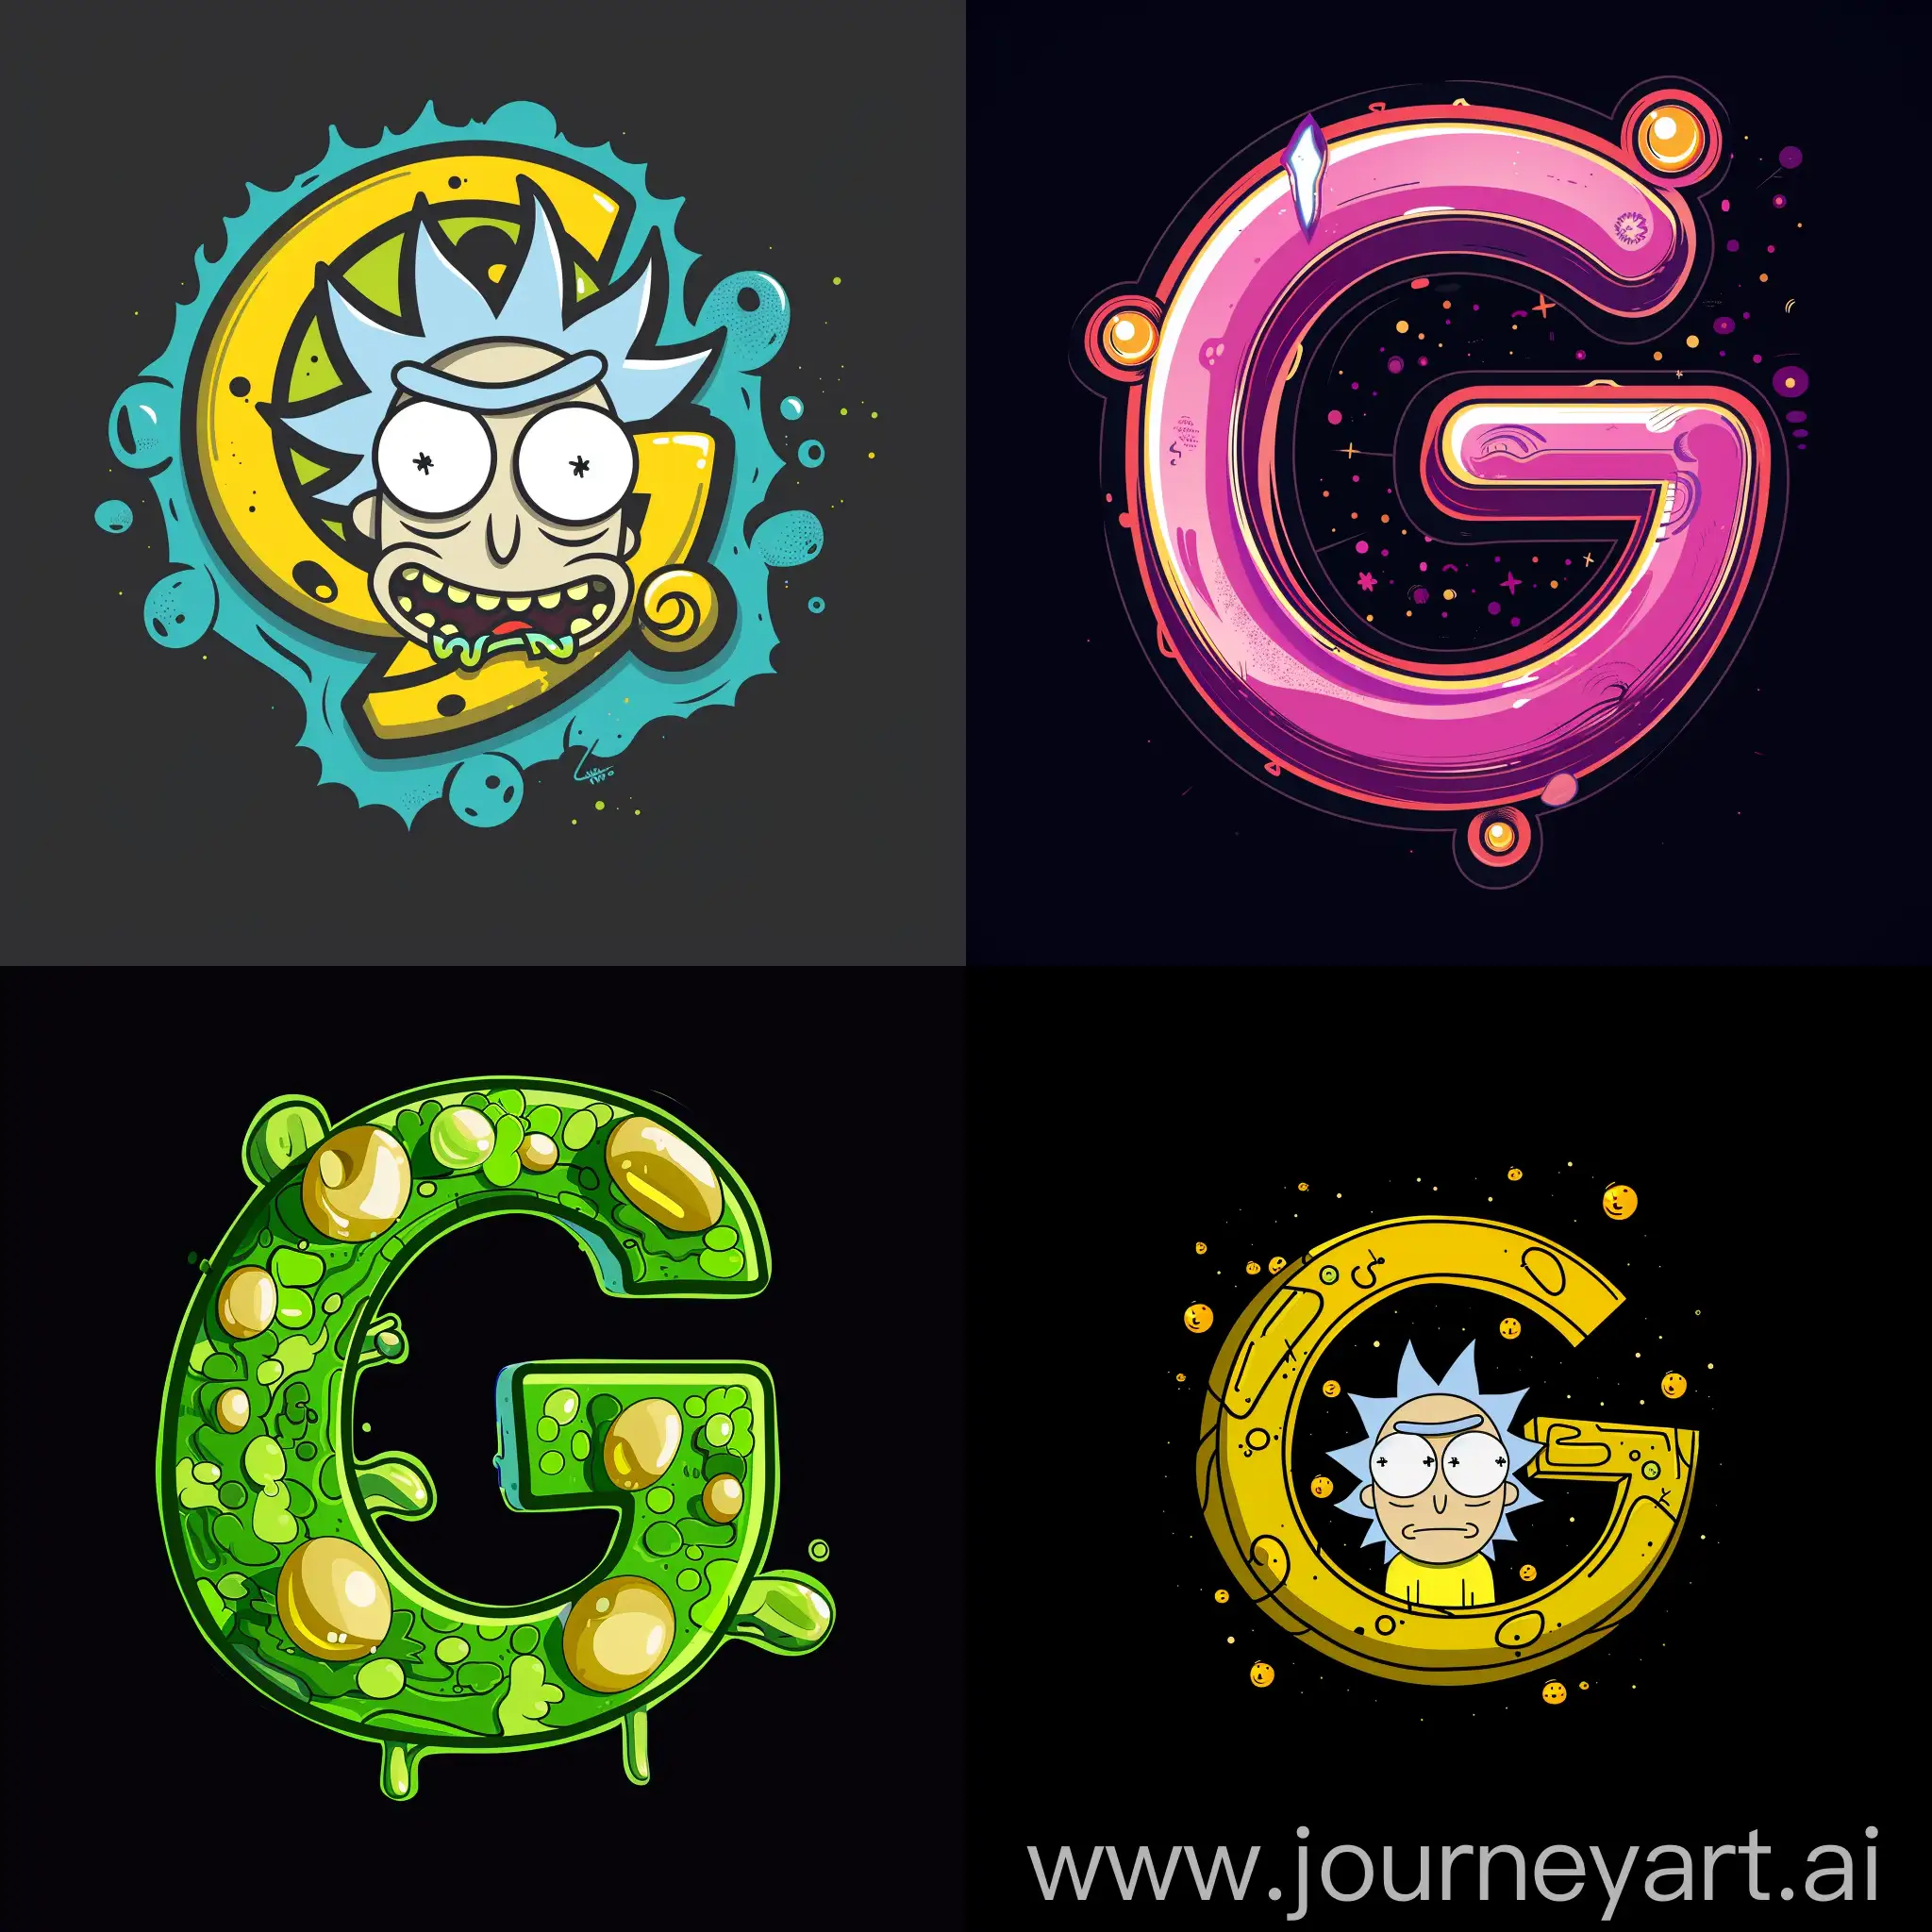 Rick-and-Morty-Style-G-Letter-Company-Logo